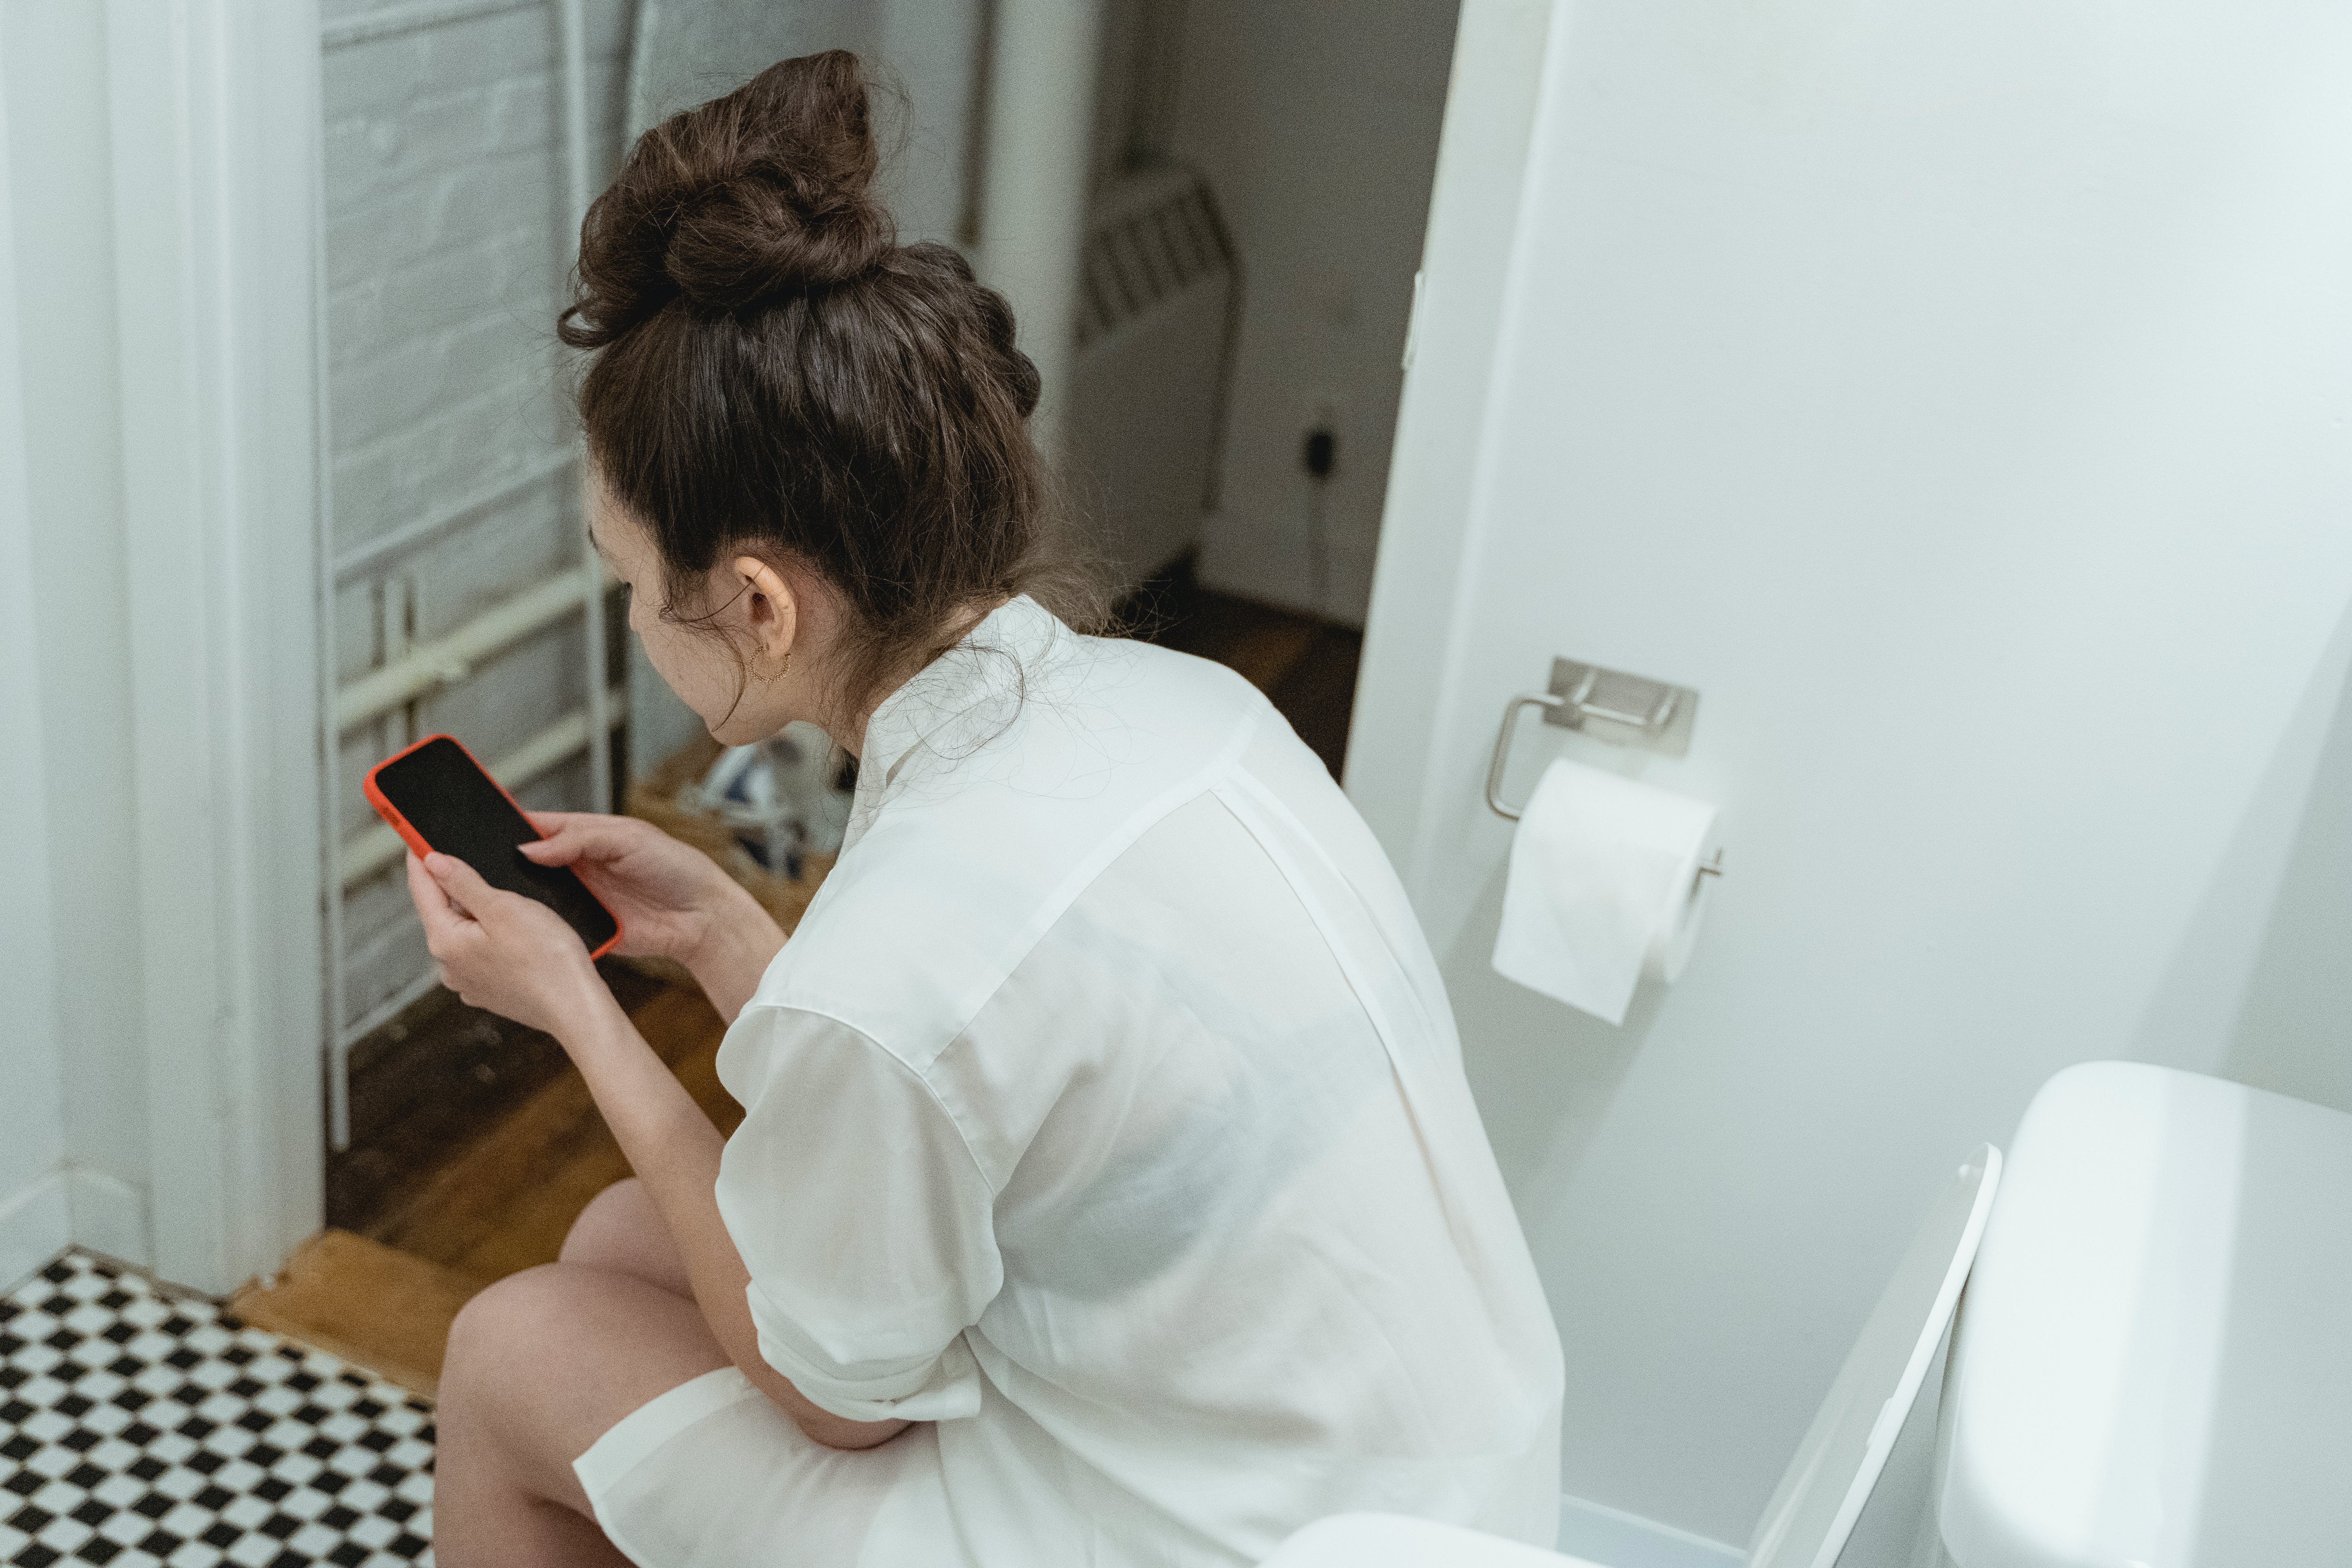 A woman sitting on a toilet while using her phone | Source: Pexels